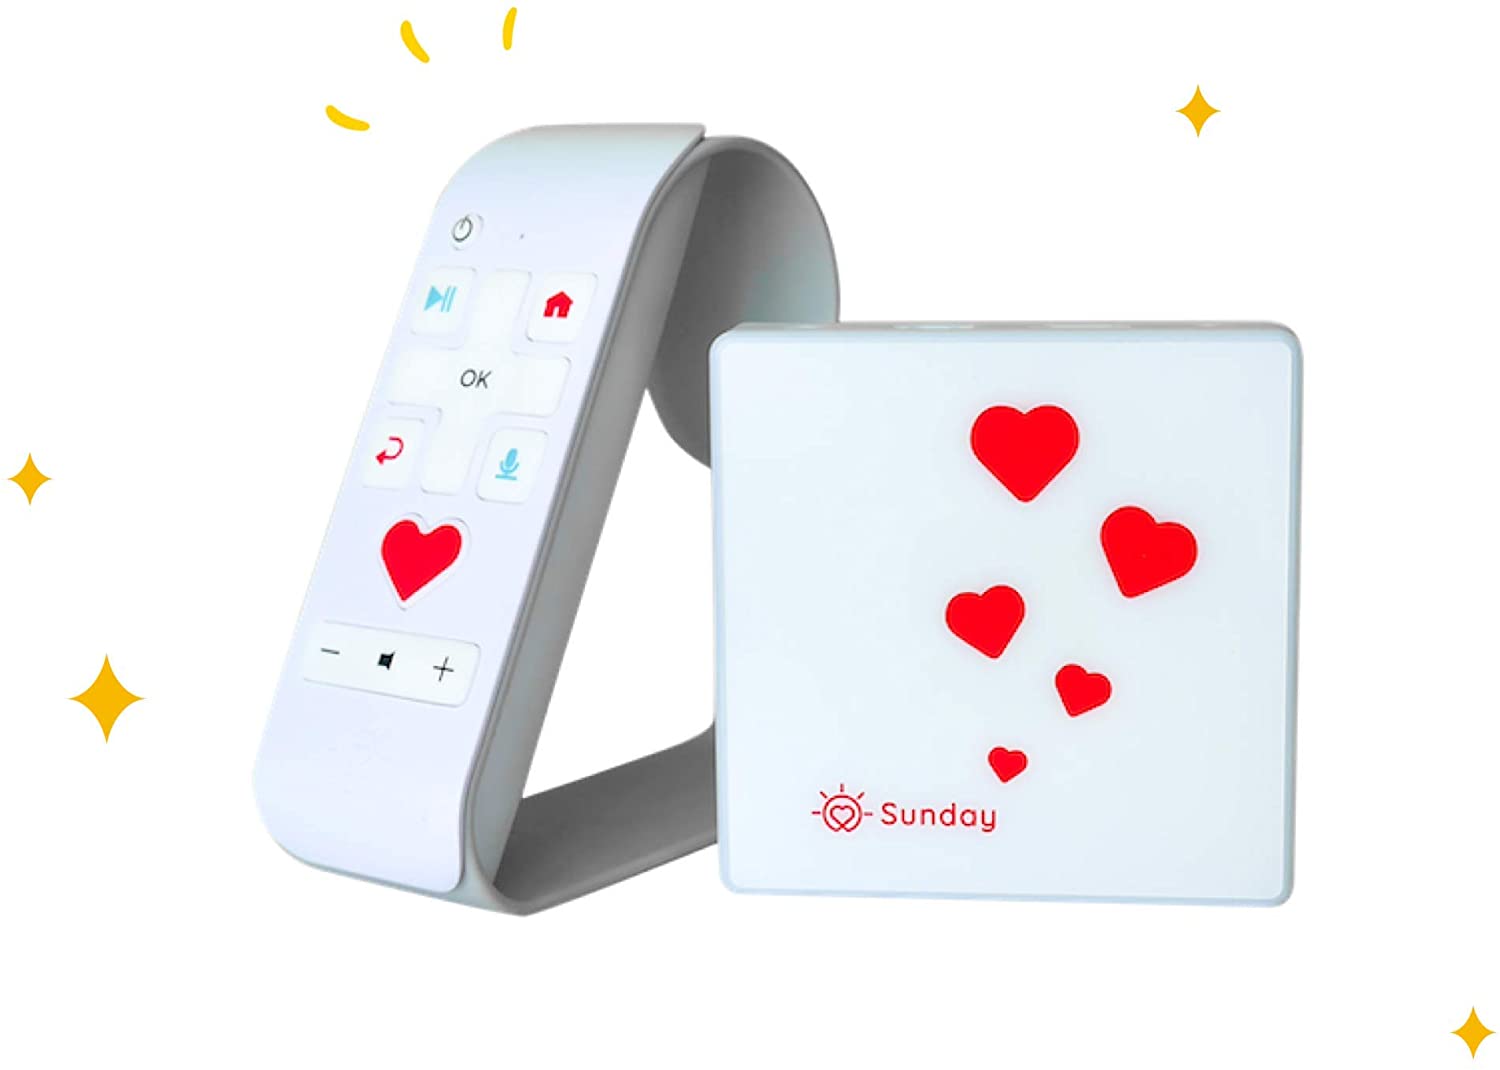 Sunday Box Families, Photos, Videos on TV Grandparents - New Grandparents Gift, Family Photo Sharing Box on TV with Sunday Heart Remote